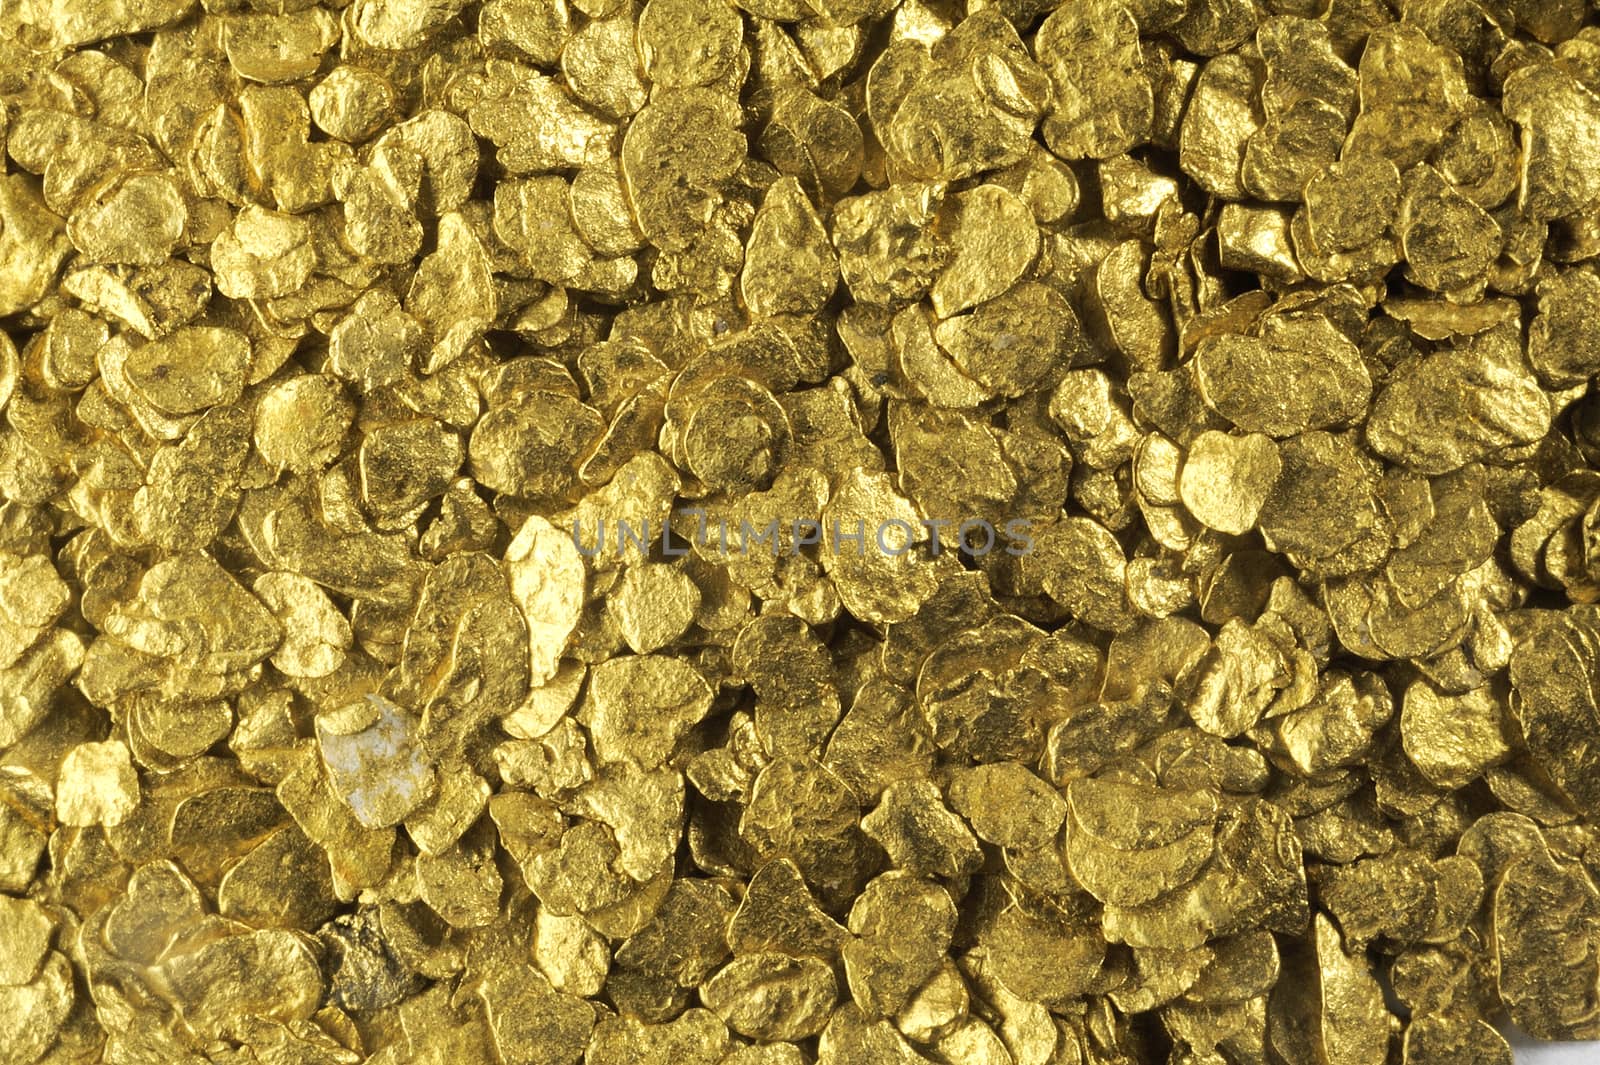 glitter background placer gold found in France